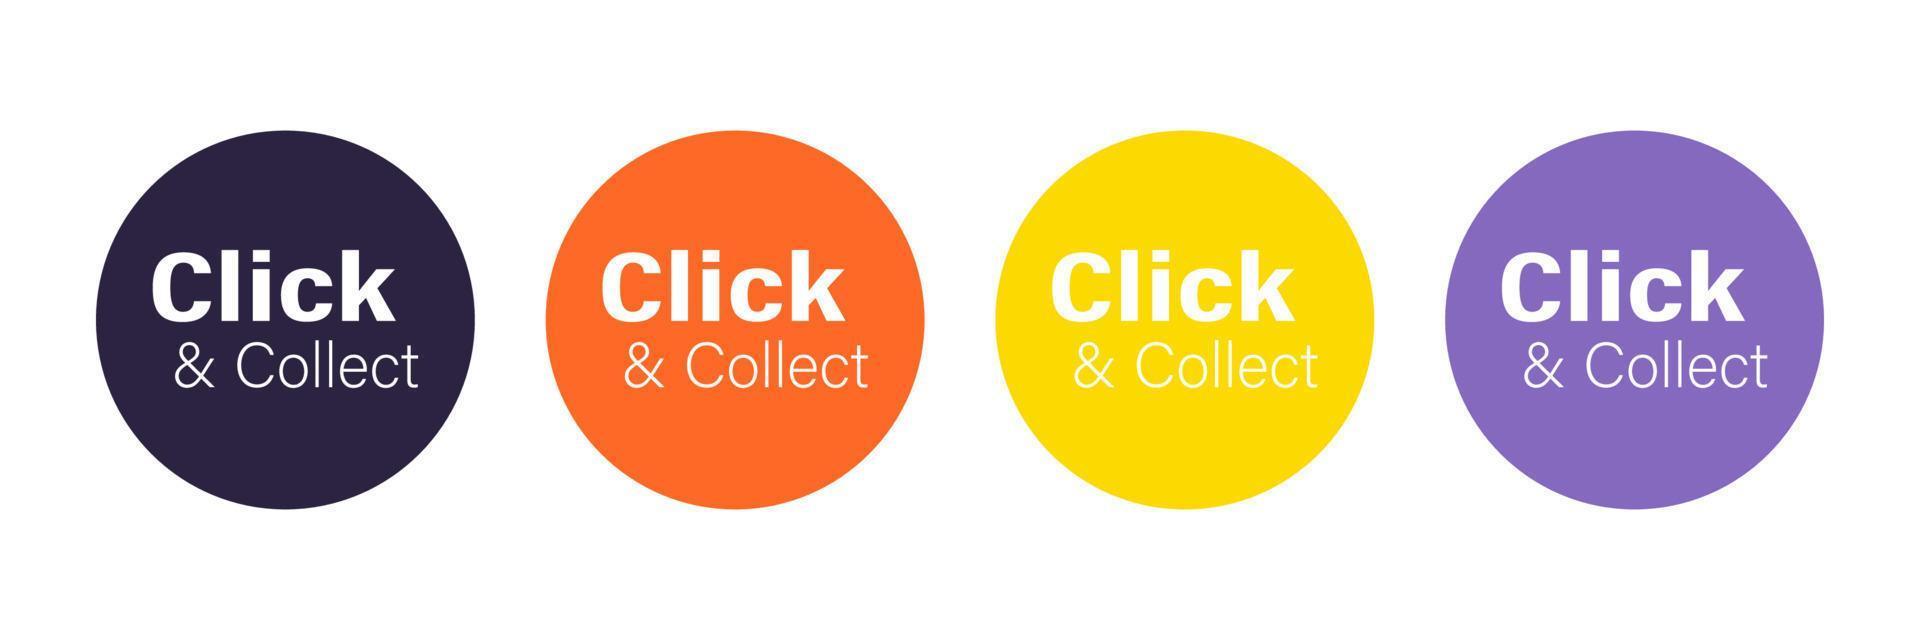 Click and collect on speech bubbles set vector